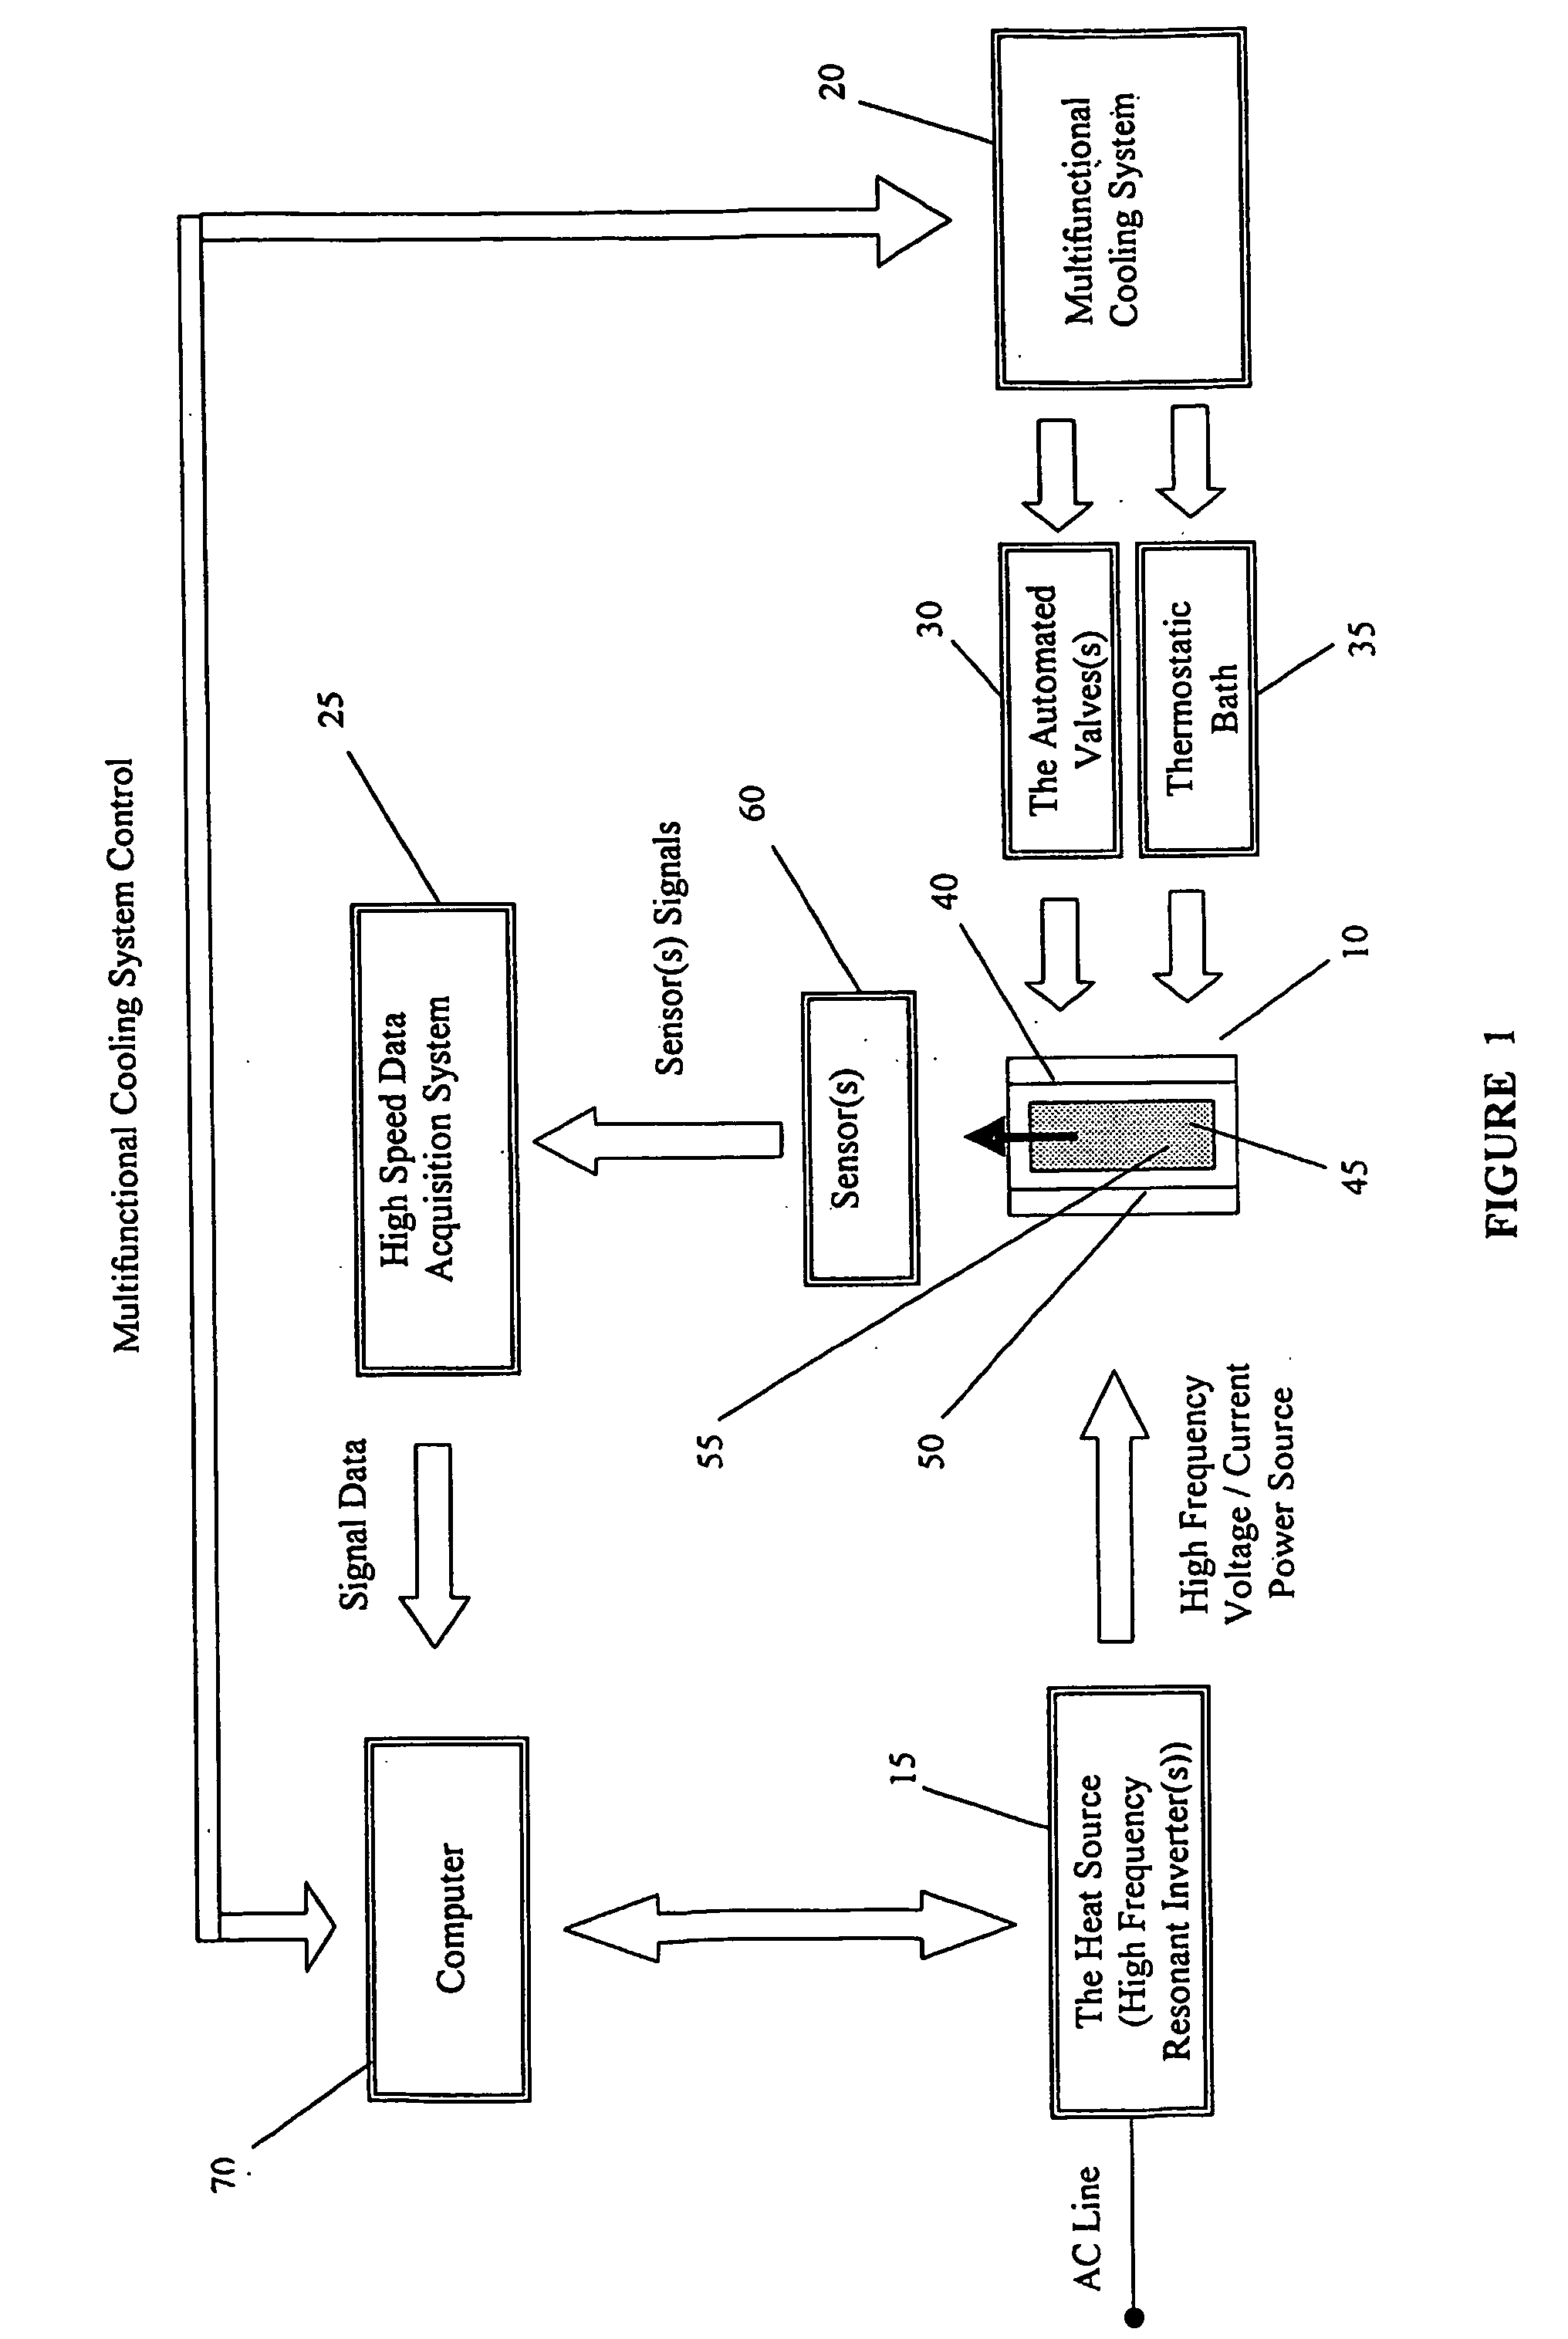 Method and apparatus for universal metallurgical simulation and analysis